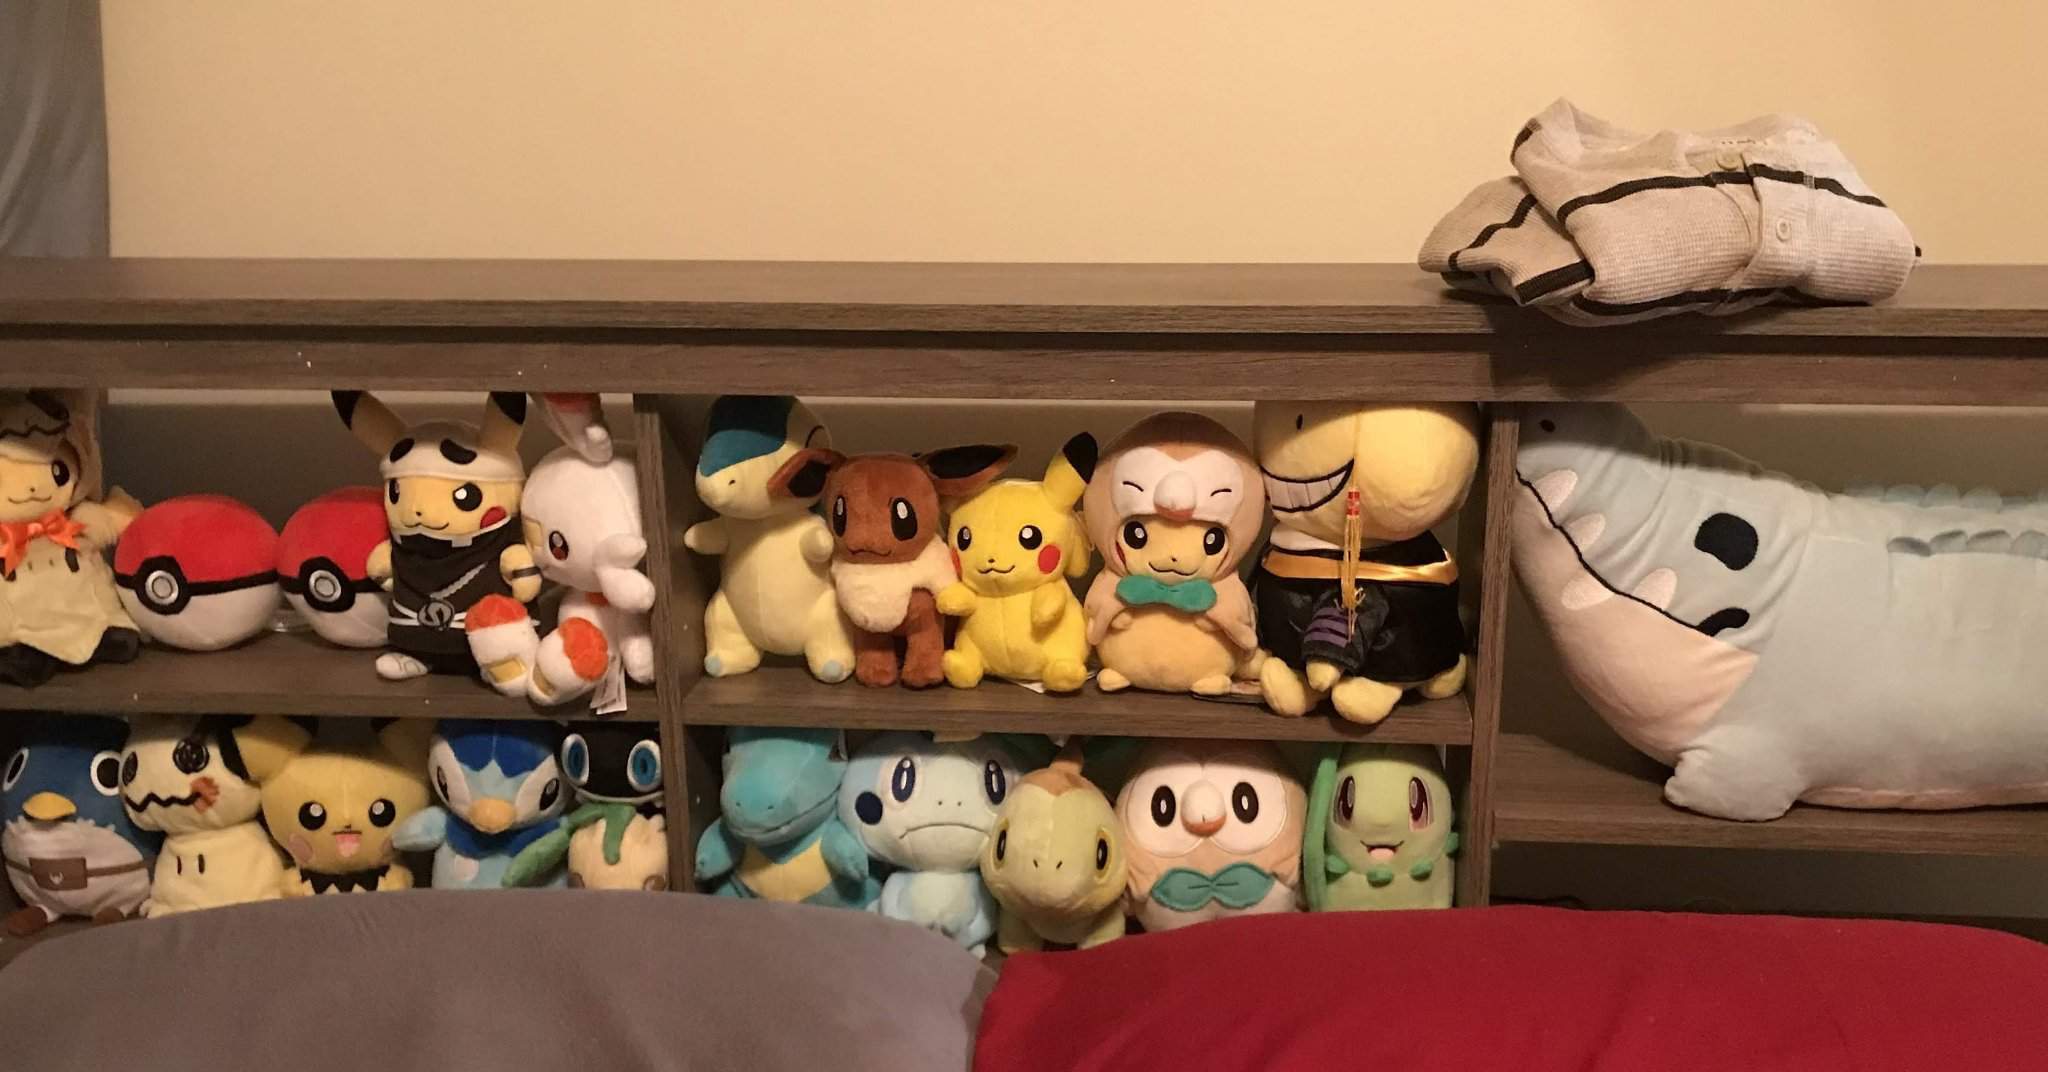 the plushies